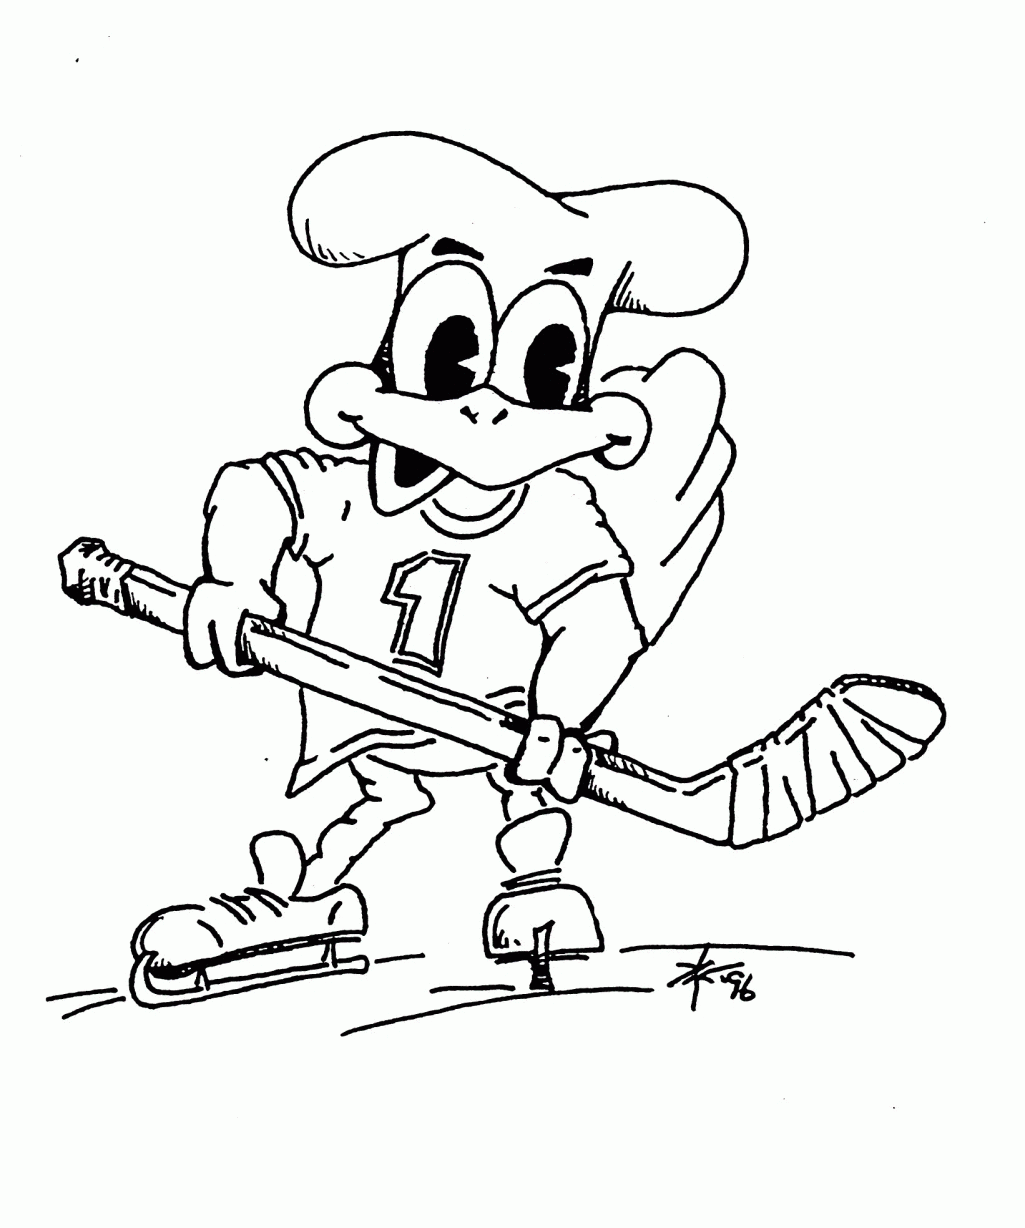 Chicago Blackhawks Coloring Page Get The Other Hockey Teams Sports ...